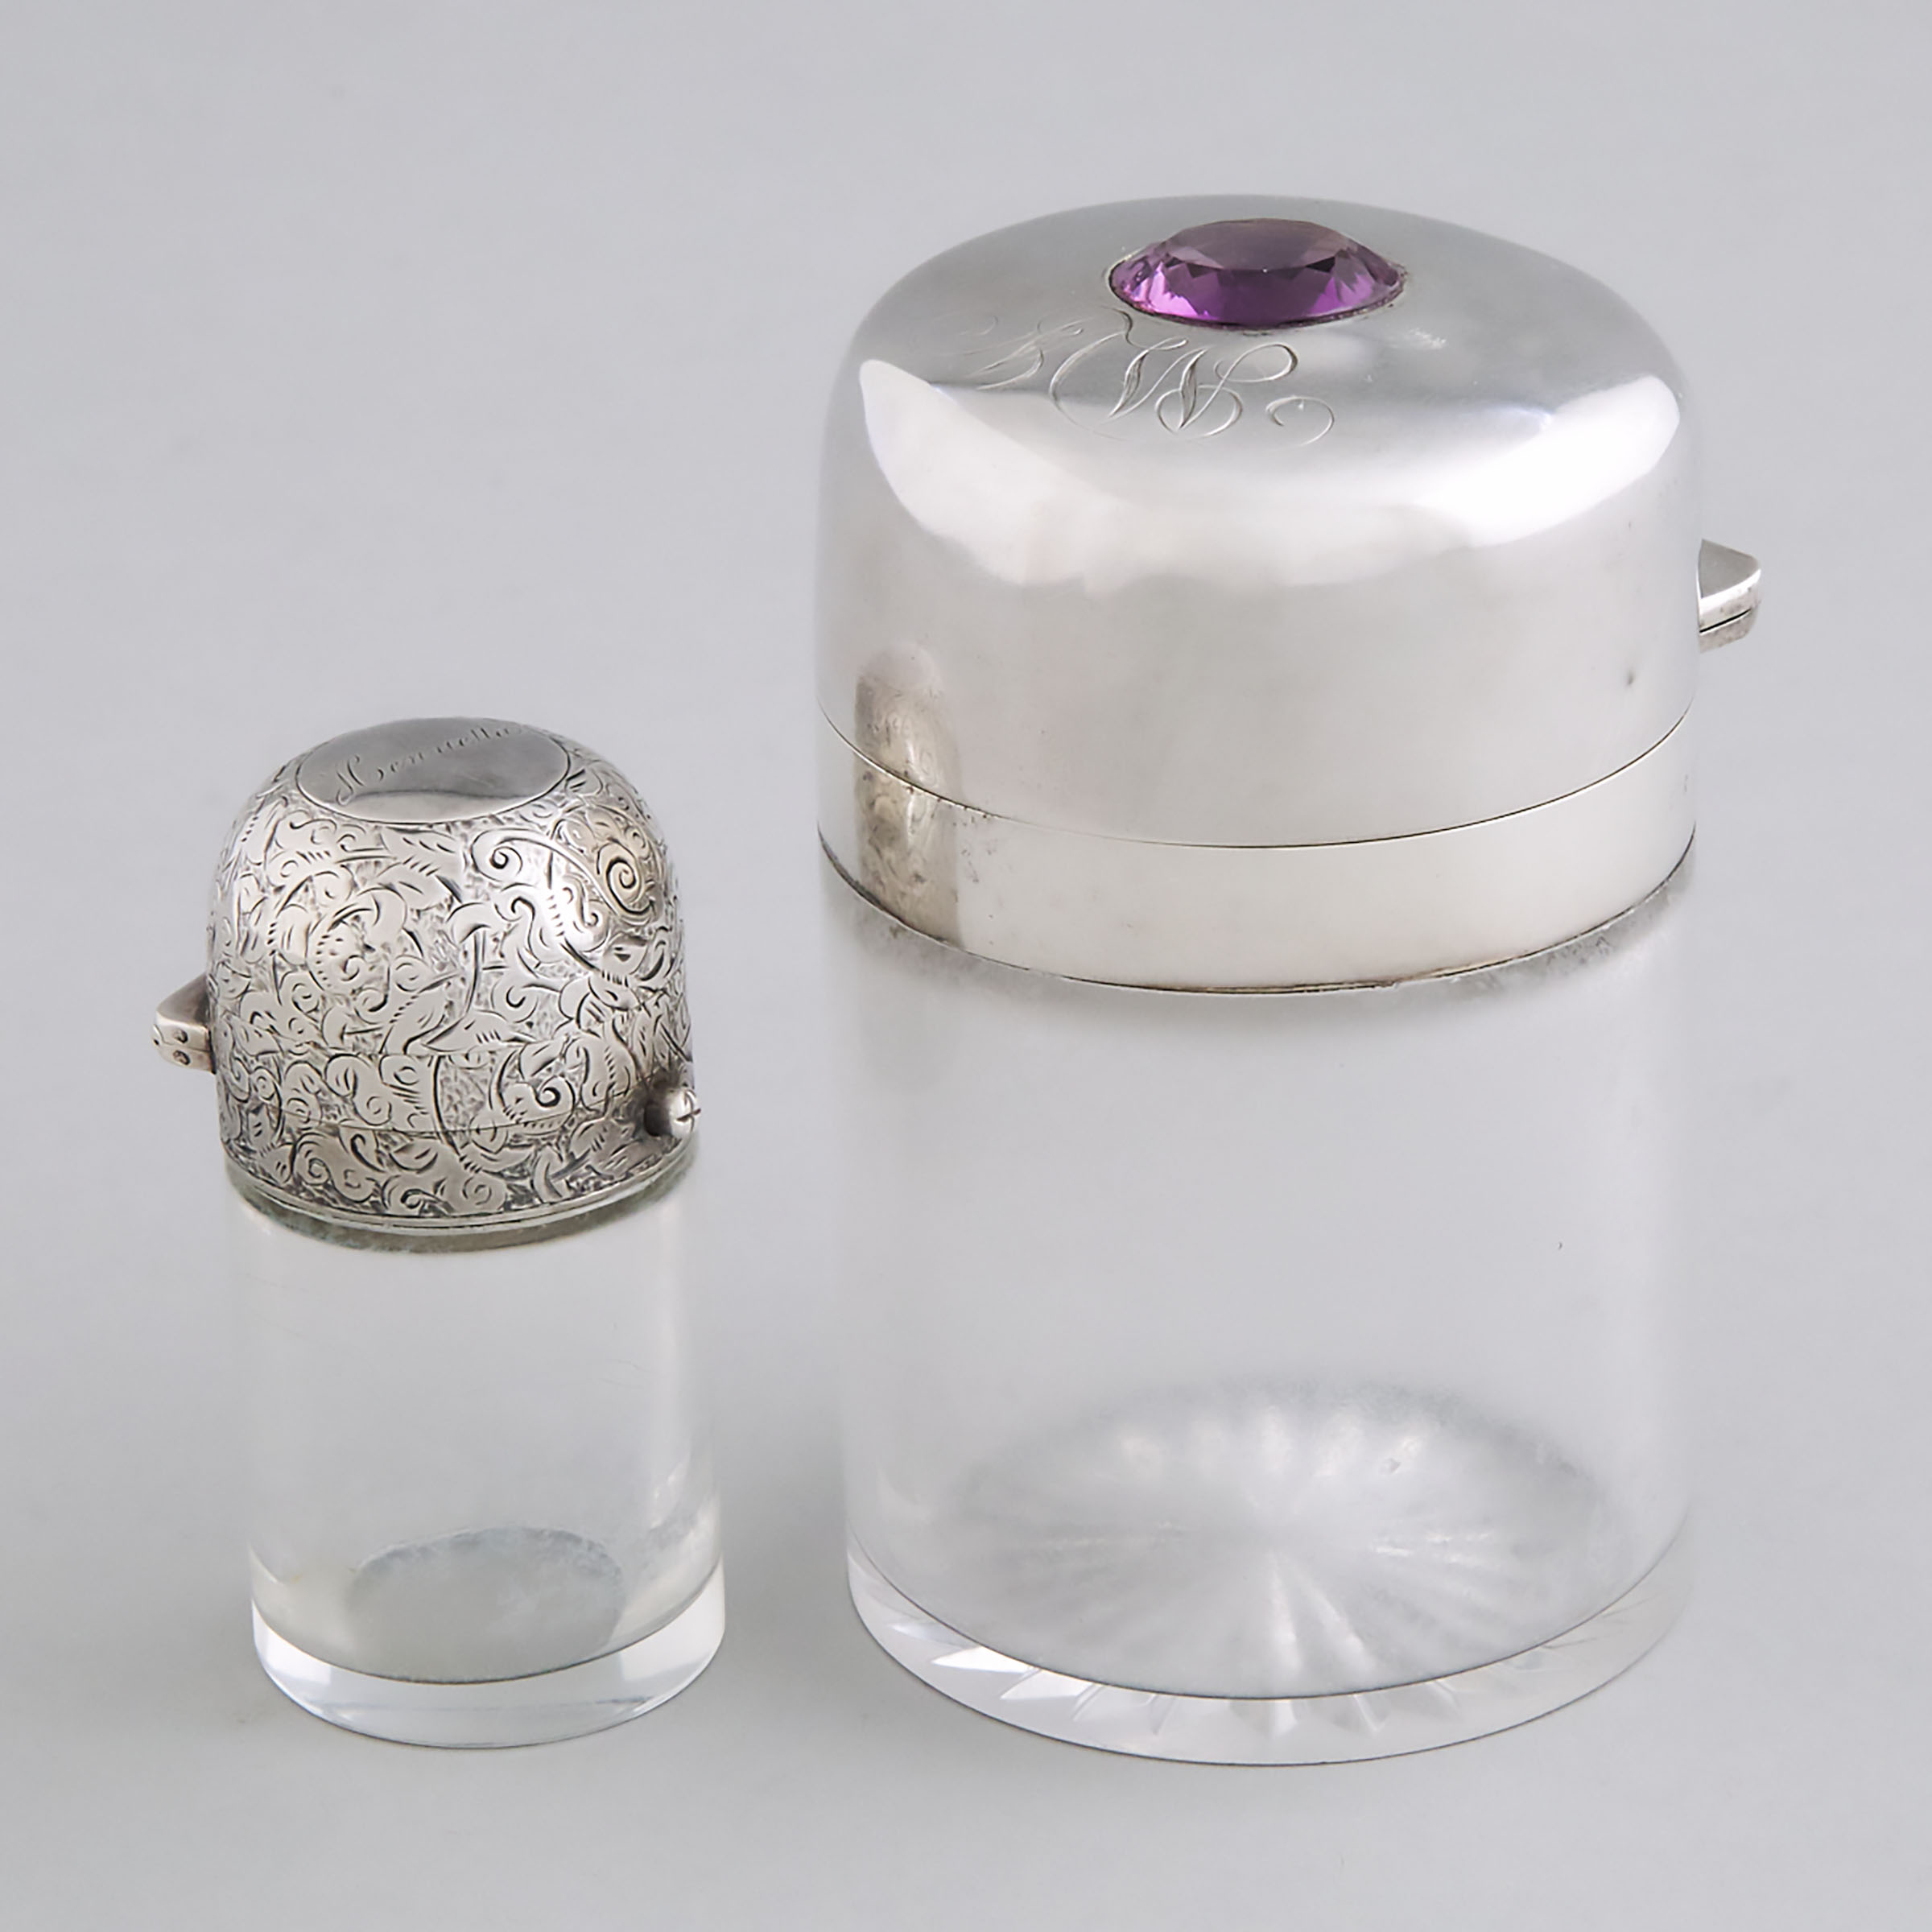 American Silver Mounted Glass Dressing Table Jar, Gorham Mfg. Co., Providence, R.I., 1893 and a Smaller Victorian Jar, Sampson Mordan, London, 1887